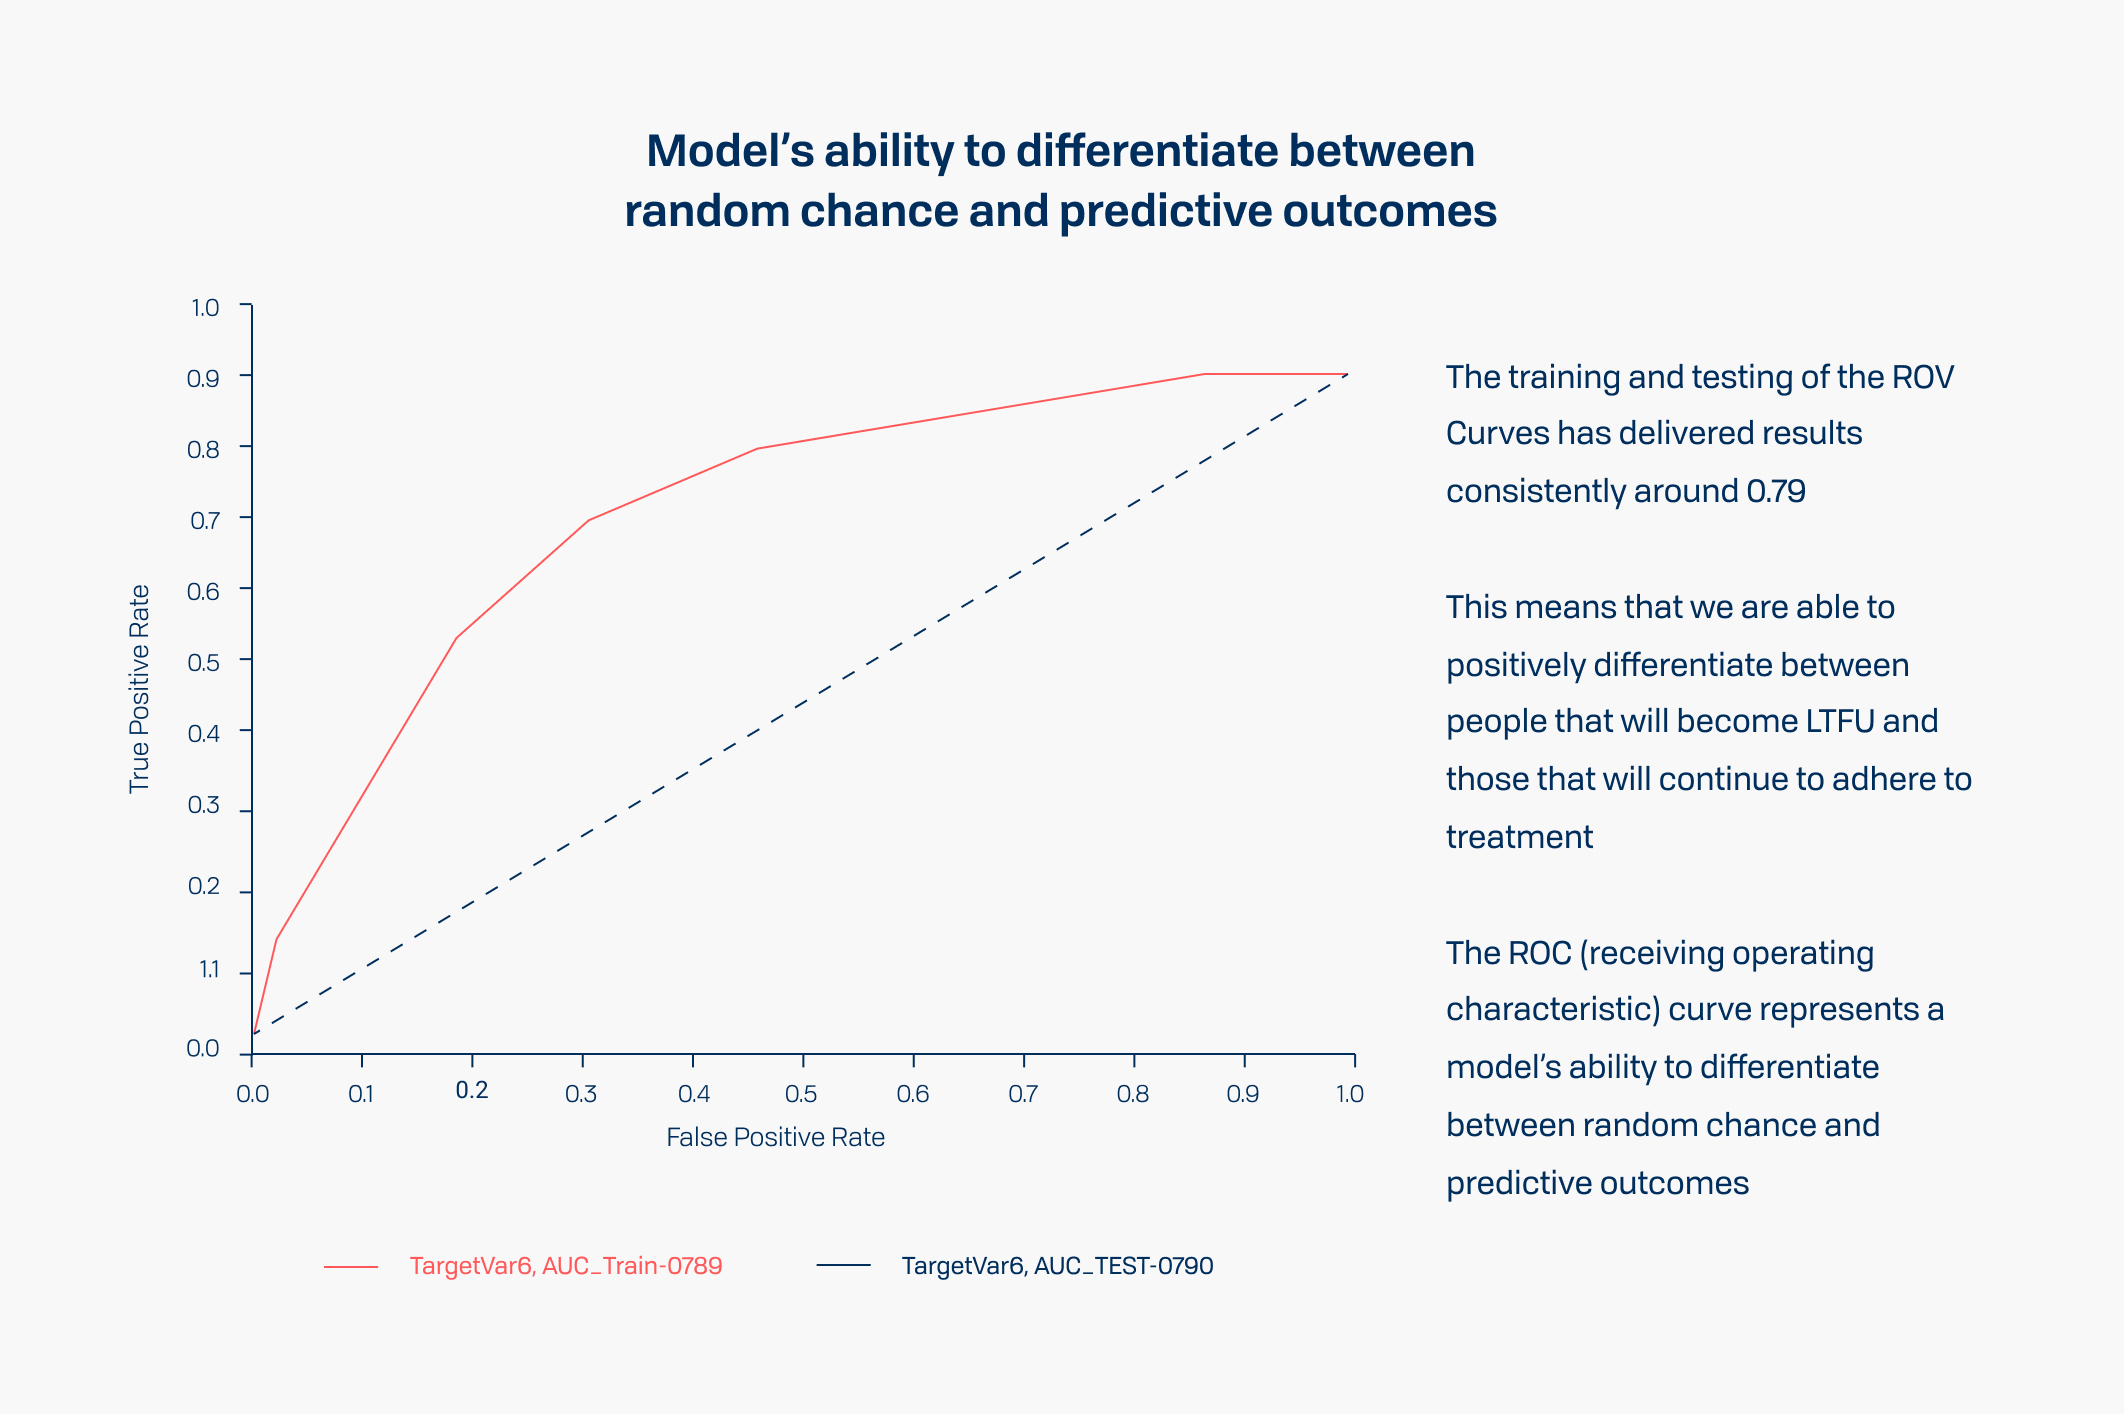 Model’s ability to differentiate between random chance and predictive outcomes